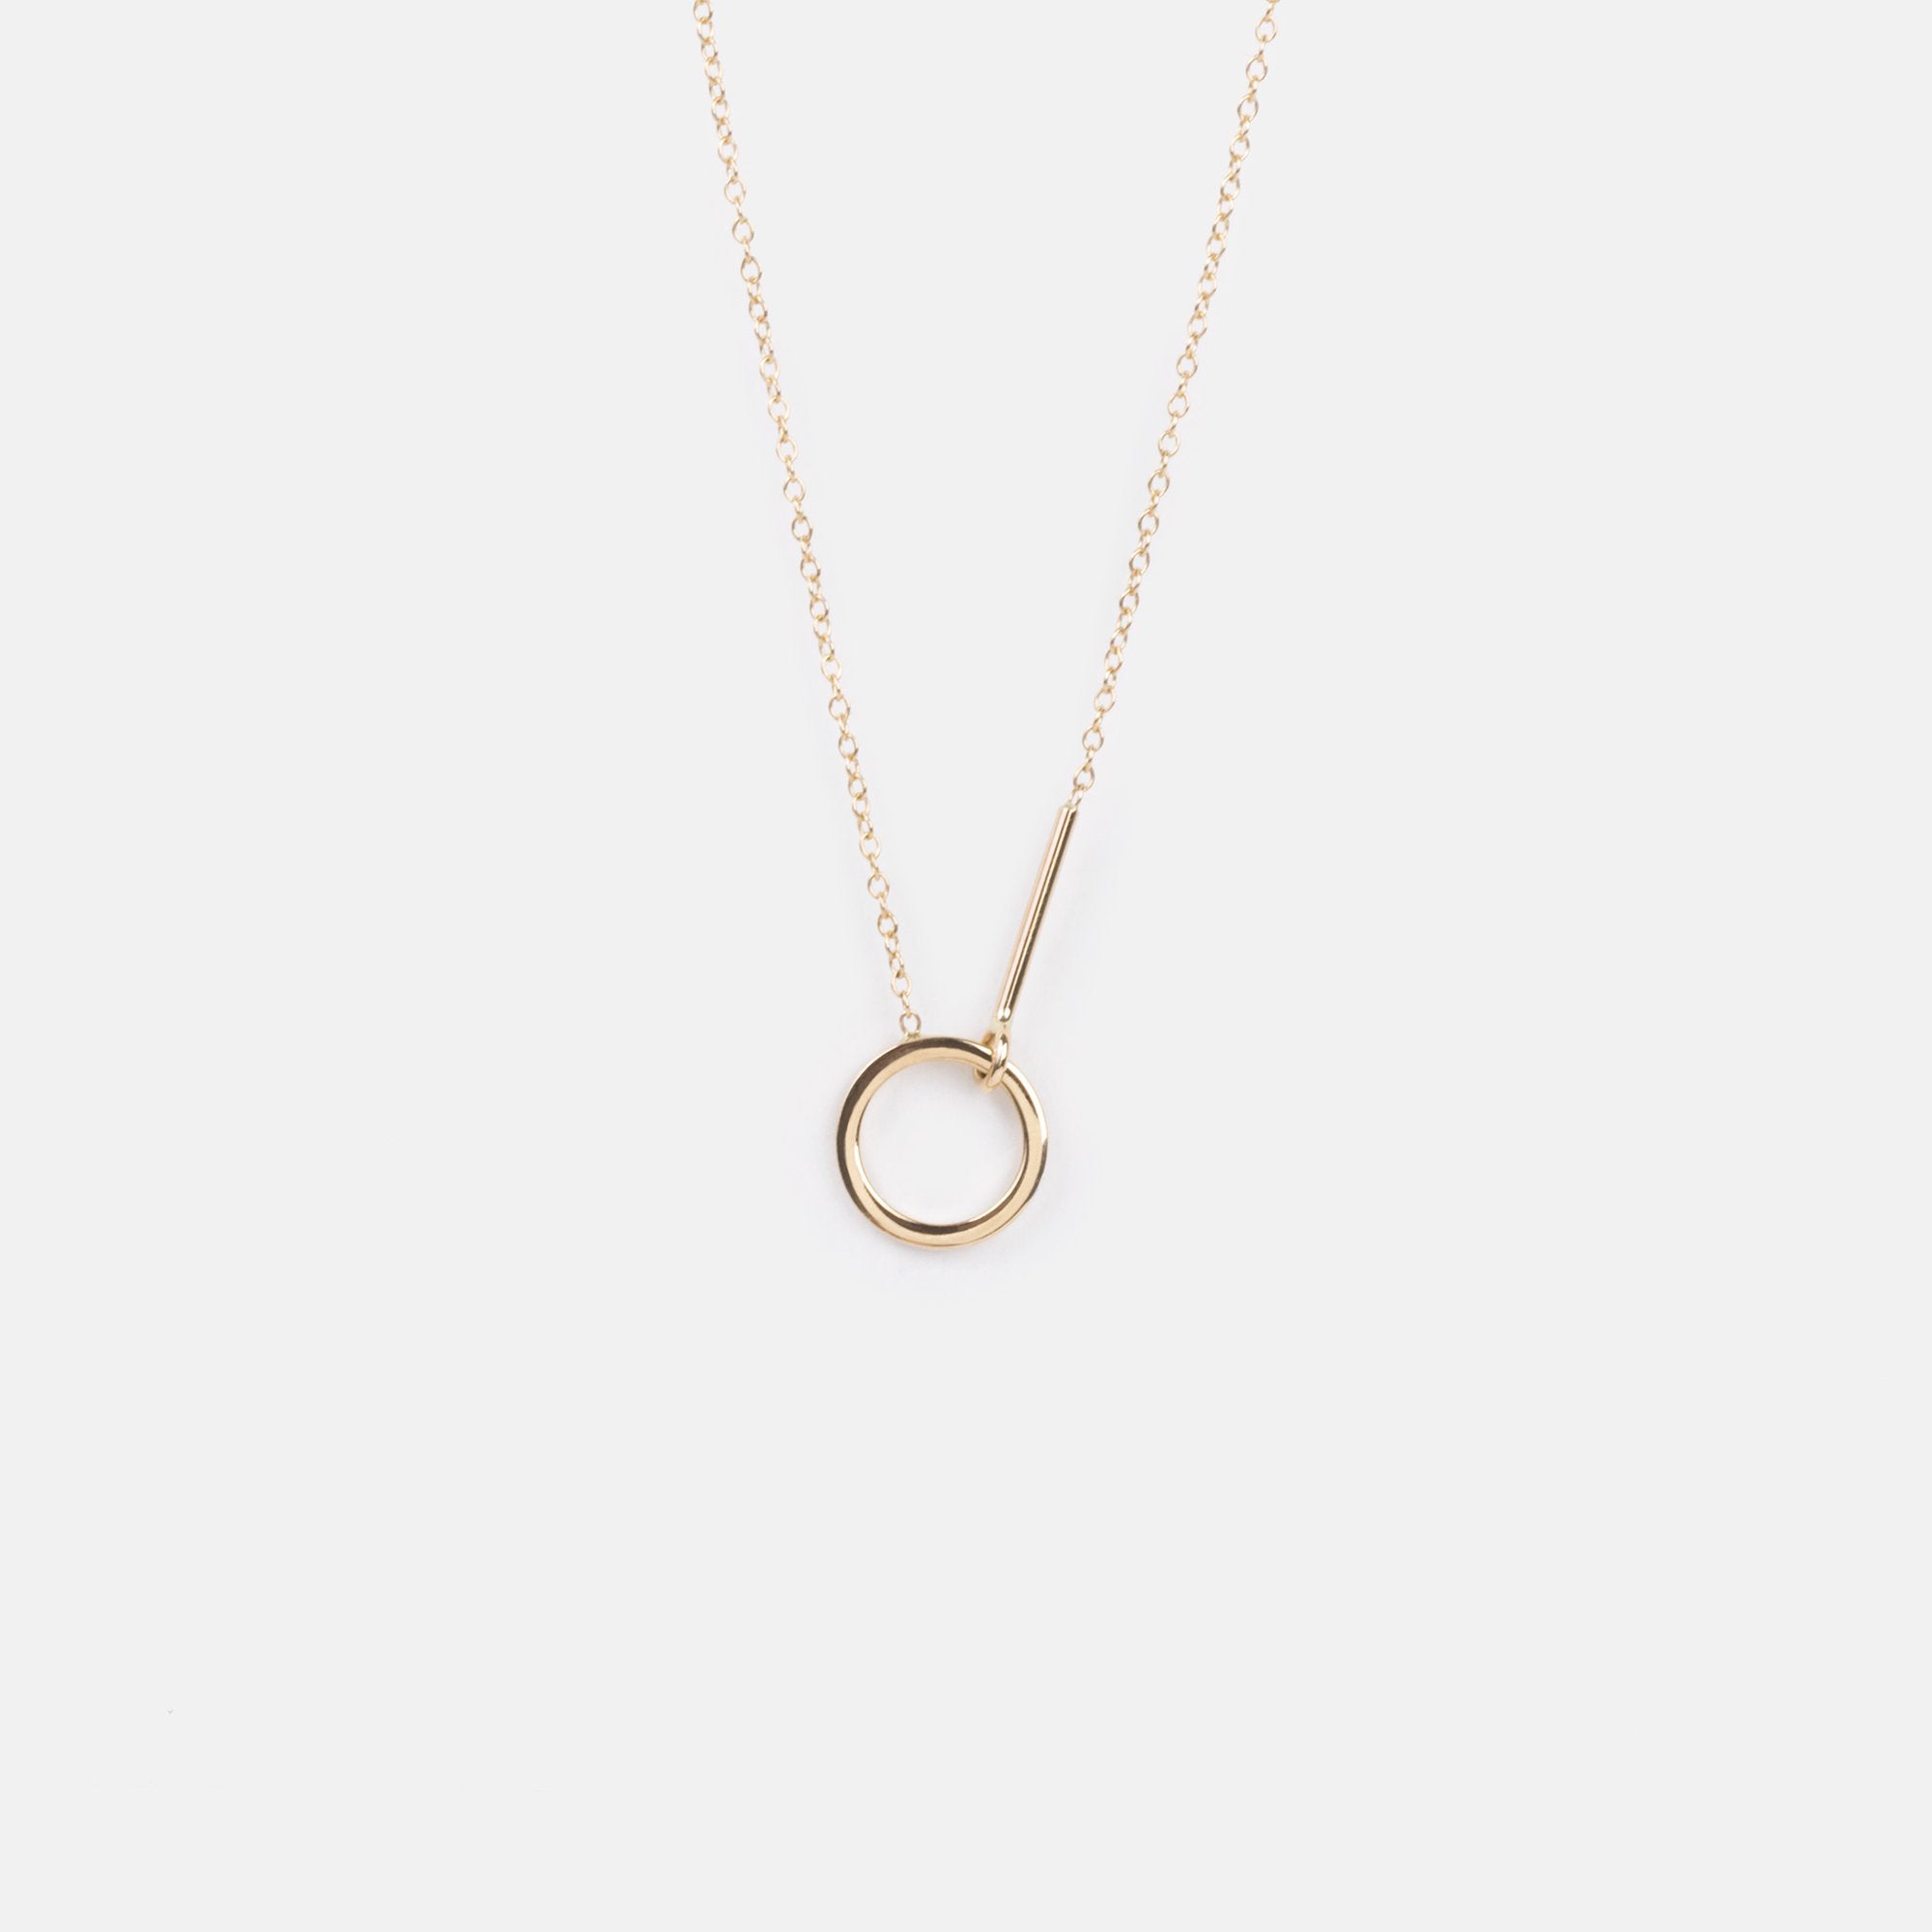 Visata Plain Necklace in 14k Gold By SHW Fine Jewelry NYC